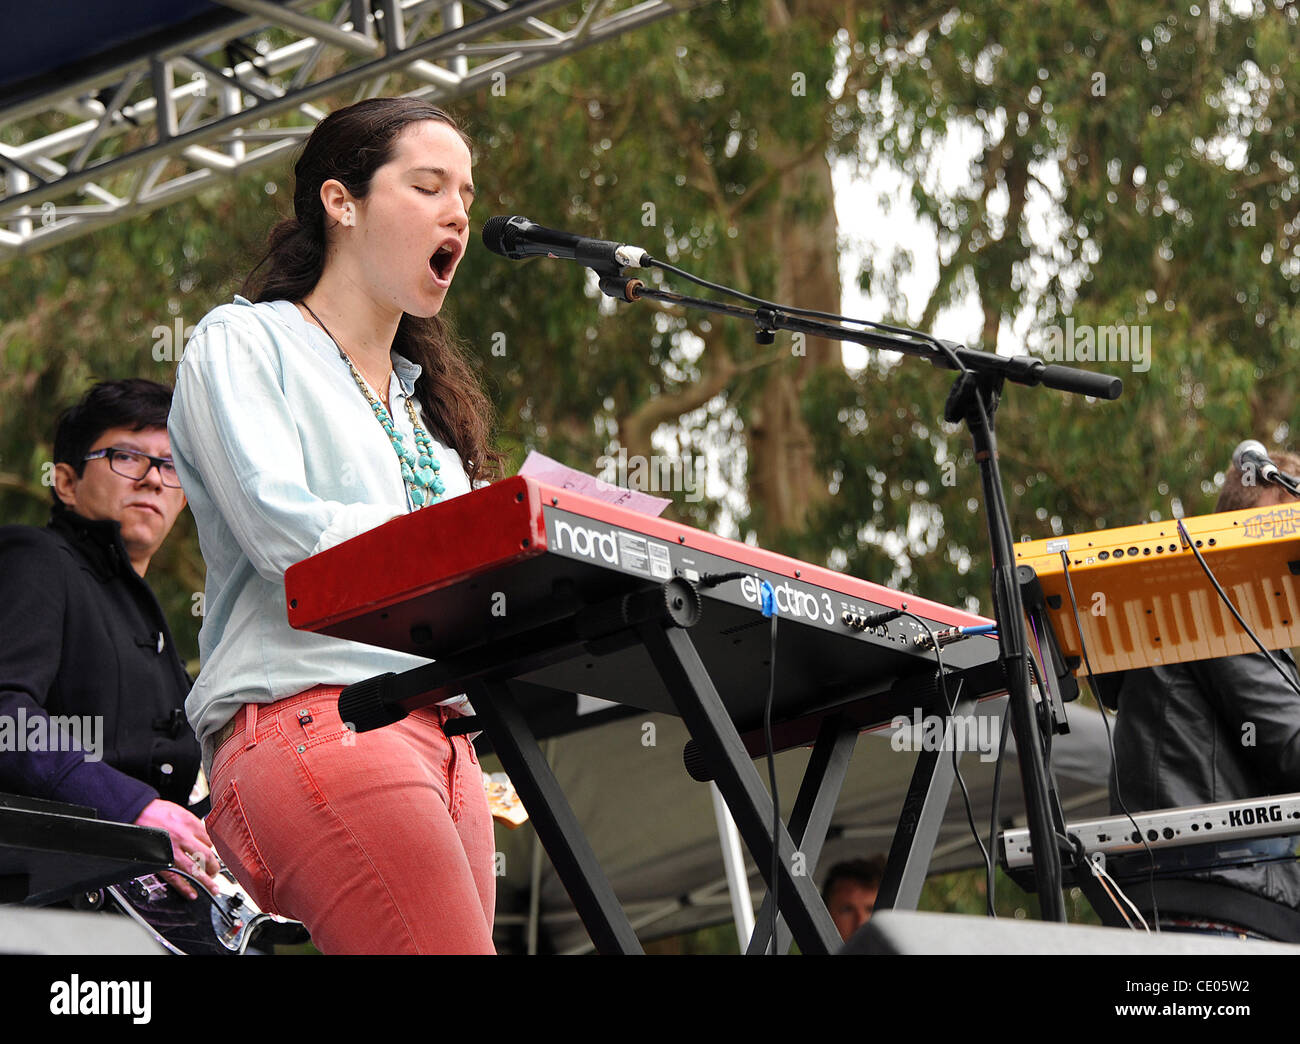 Aug 13, 2011 - San Francisco, California; USA - Musician XIMENA SARINANA performs live as part of the 2011 Outside Lands Music Festival that is taking place at Golden Gate Park.  The three day festival will attract thousands of fans to see a variety of artist on six different stages. Copyright 2011  Stock Photo